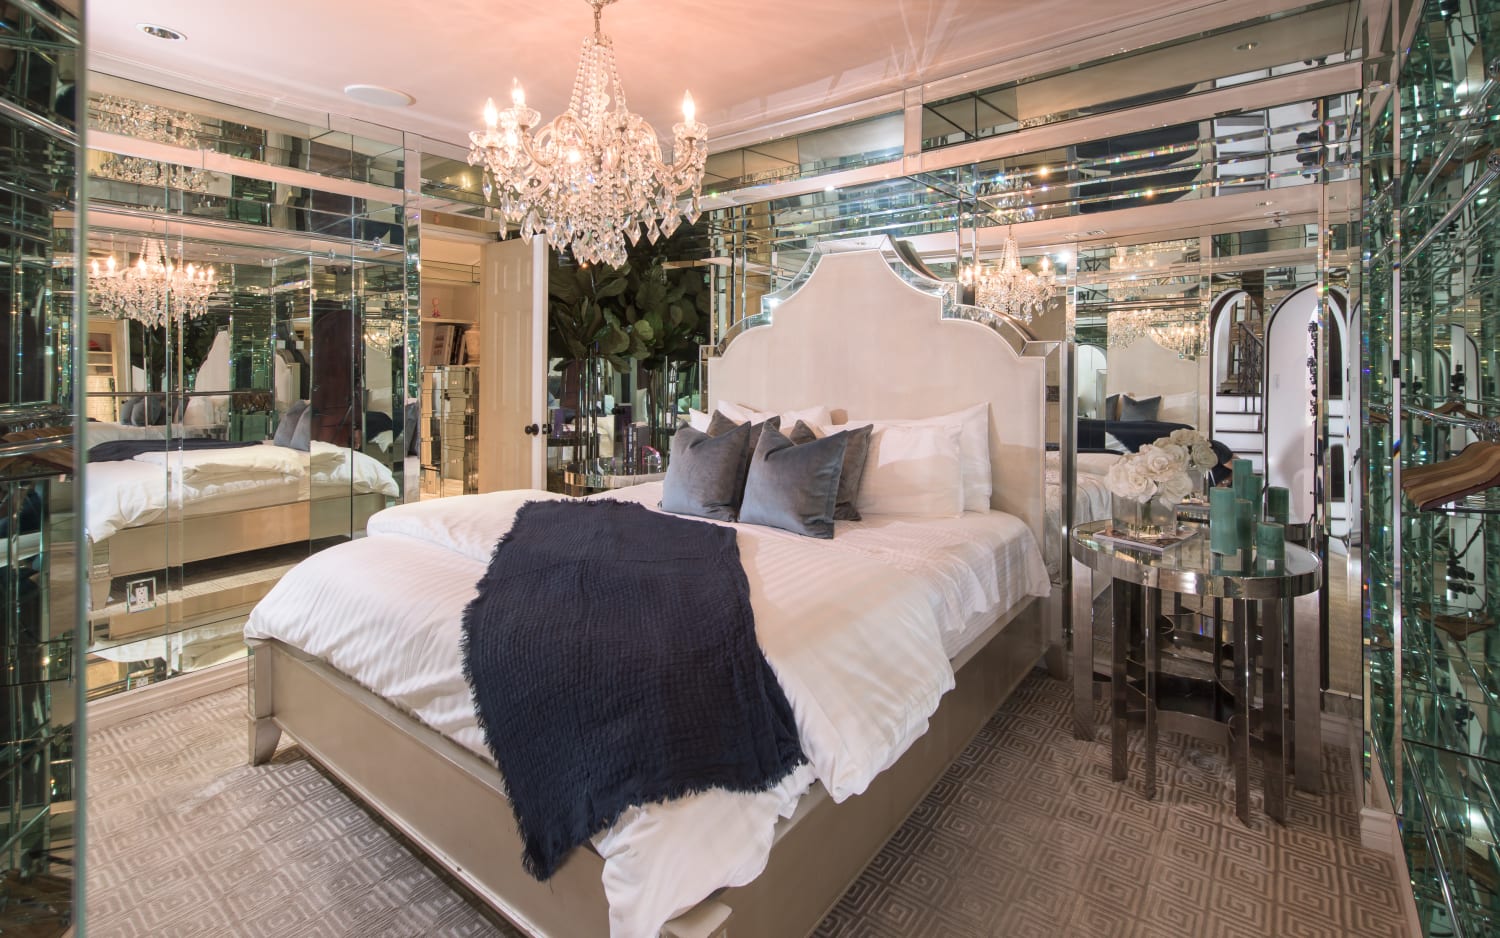 That's hot' - Paris Hilton's home range is on sale for Prime Day